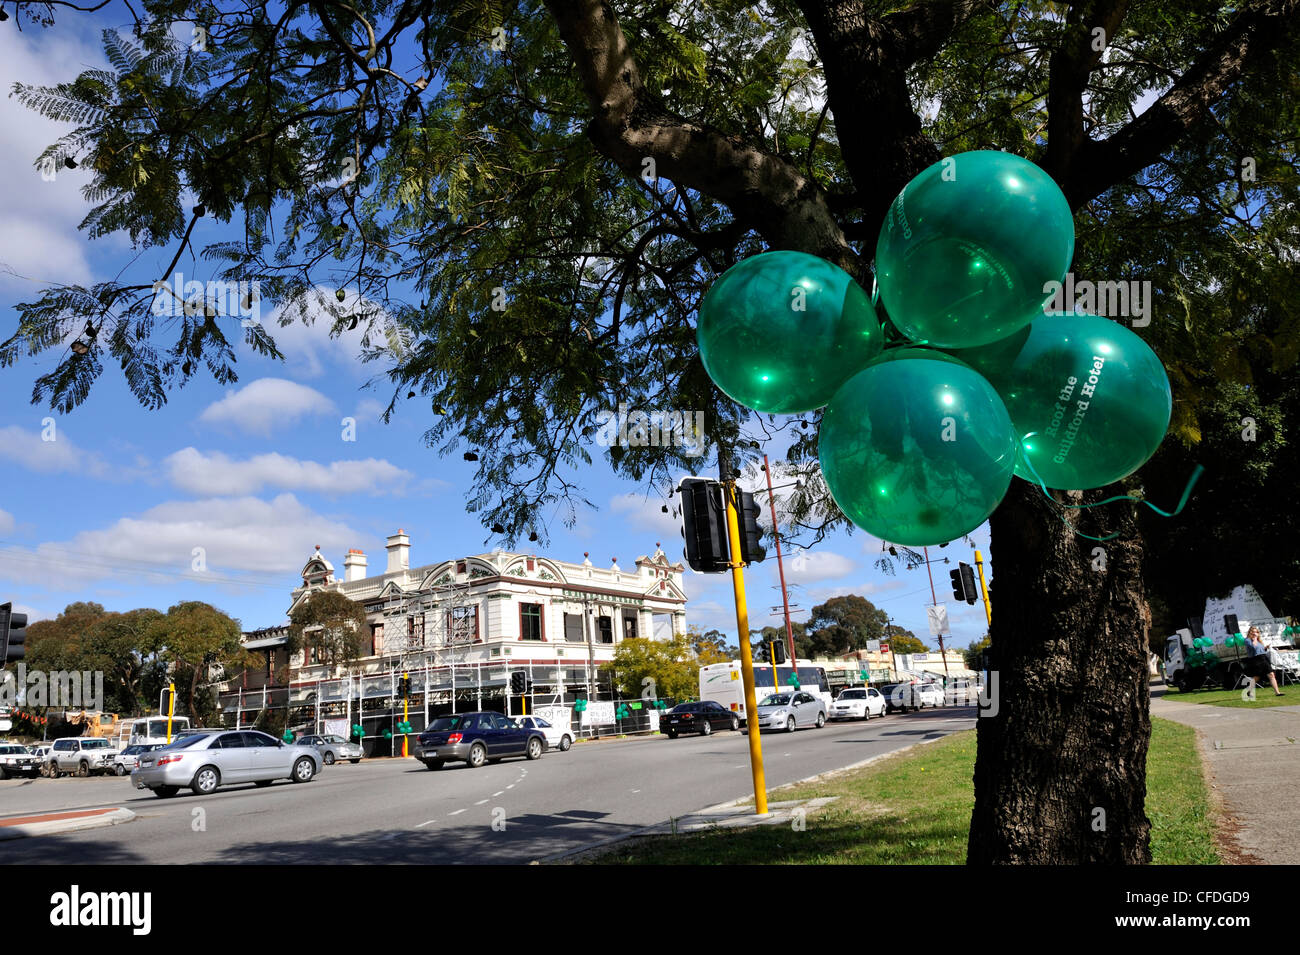 Balloons printed with 'Roof The Guildford Hotel', with the arson-damaged Guildford Hotel in background. Western Australia Stock Photo